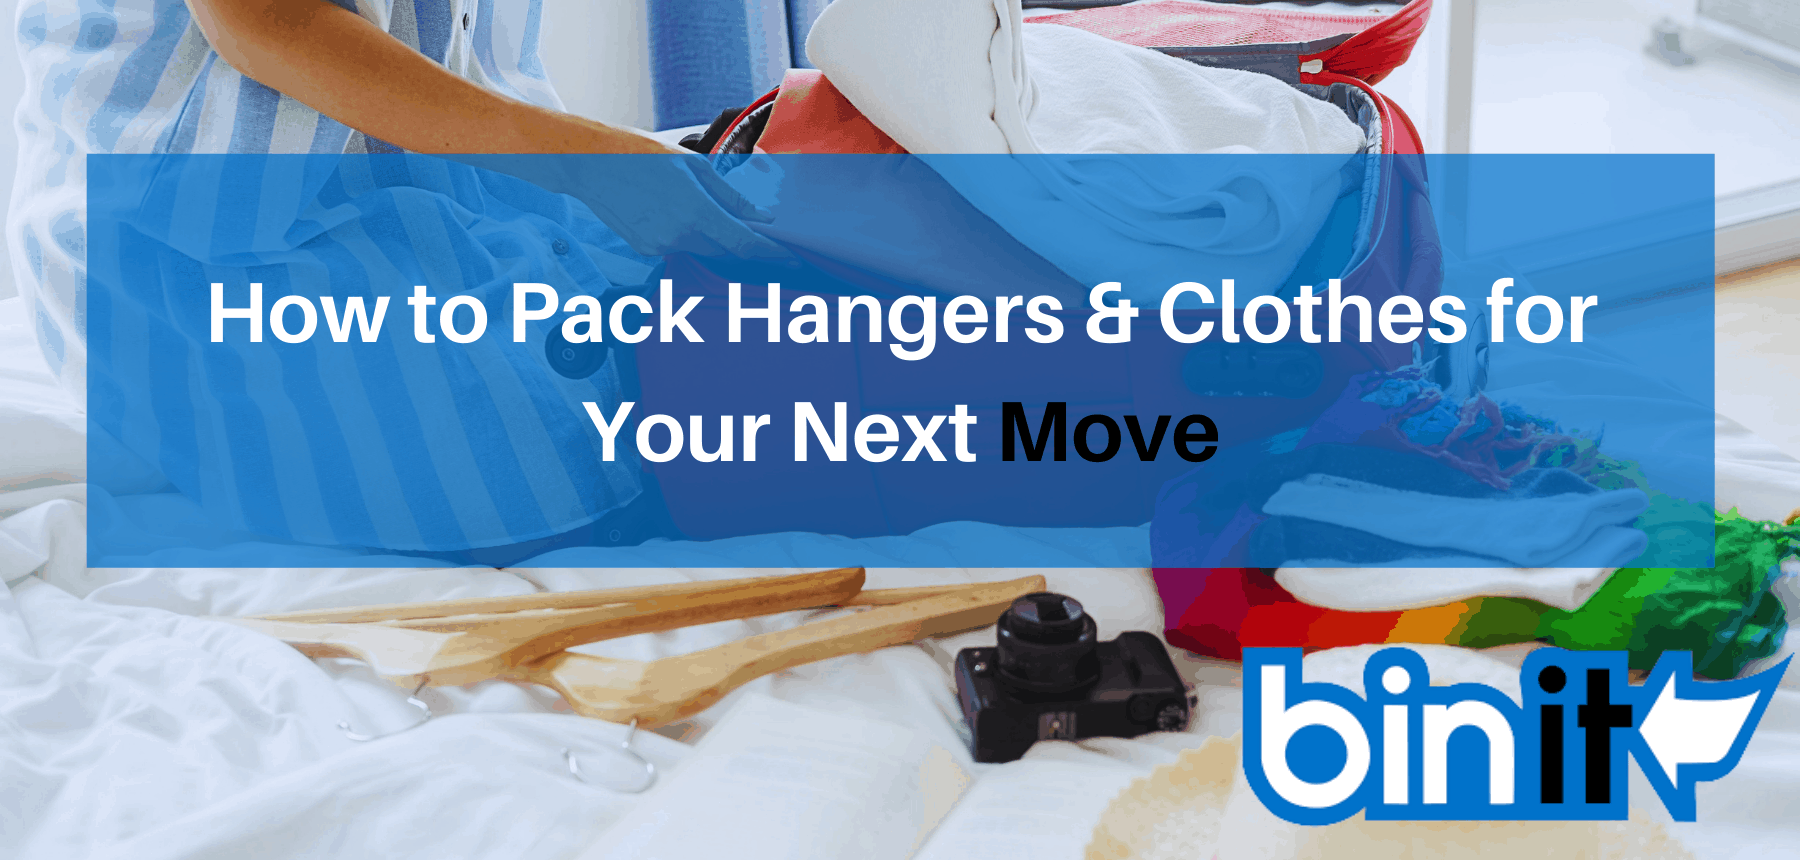 https://bin-it.com/wp-content/uploads/2021/09/How-to-Pack-Hangers-Clothes-for-Your-Next-Move-.png